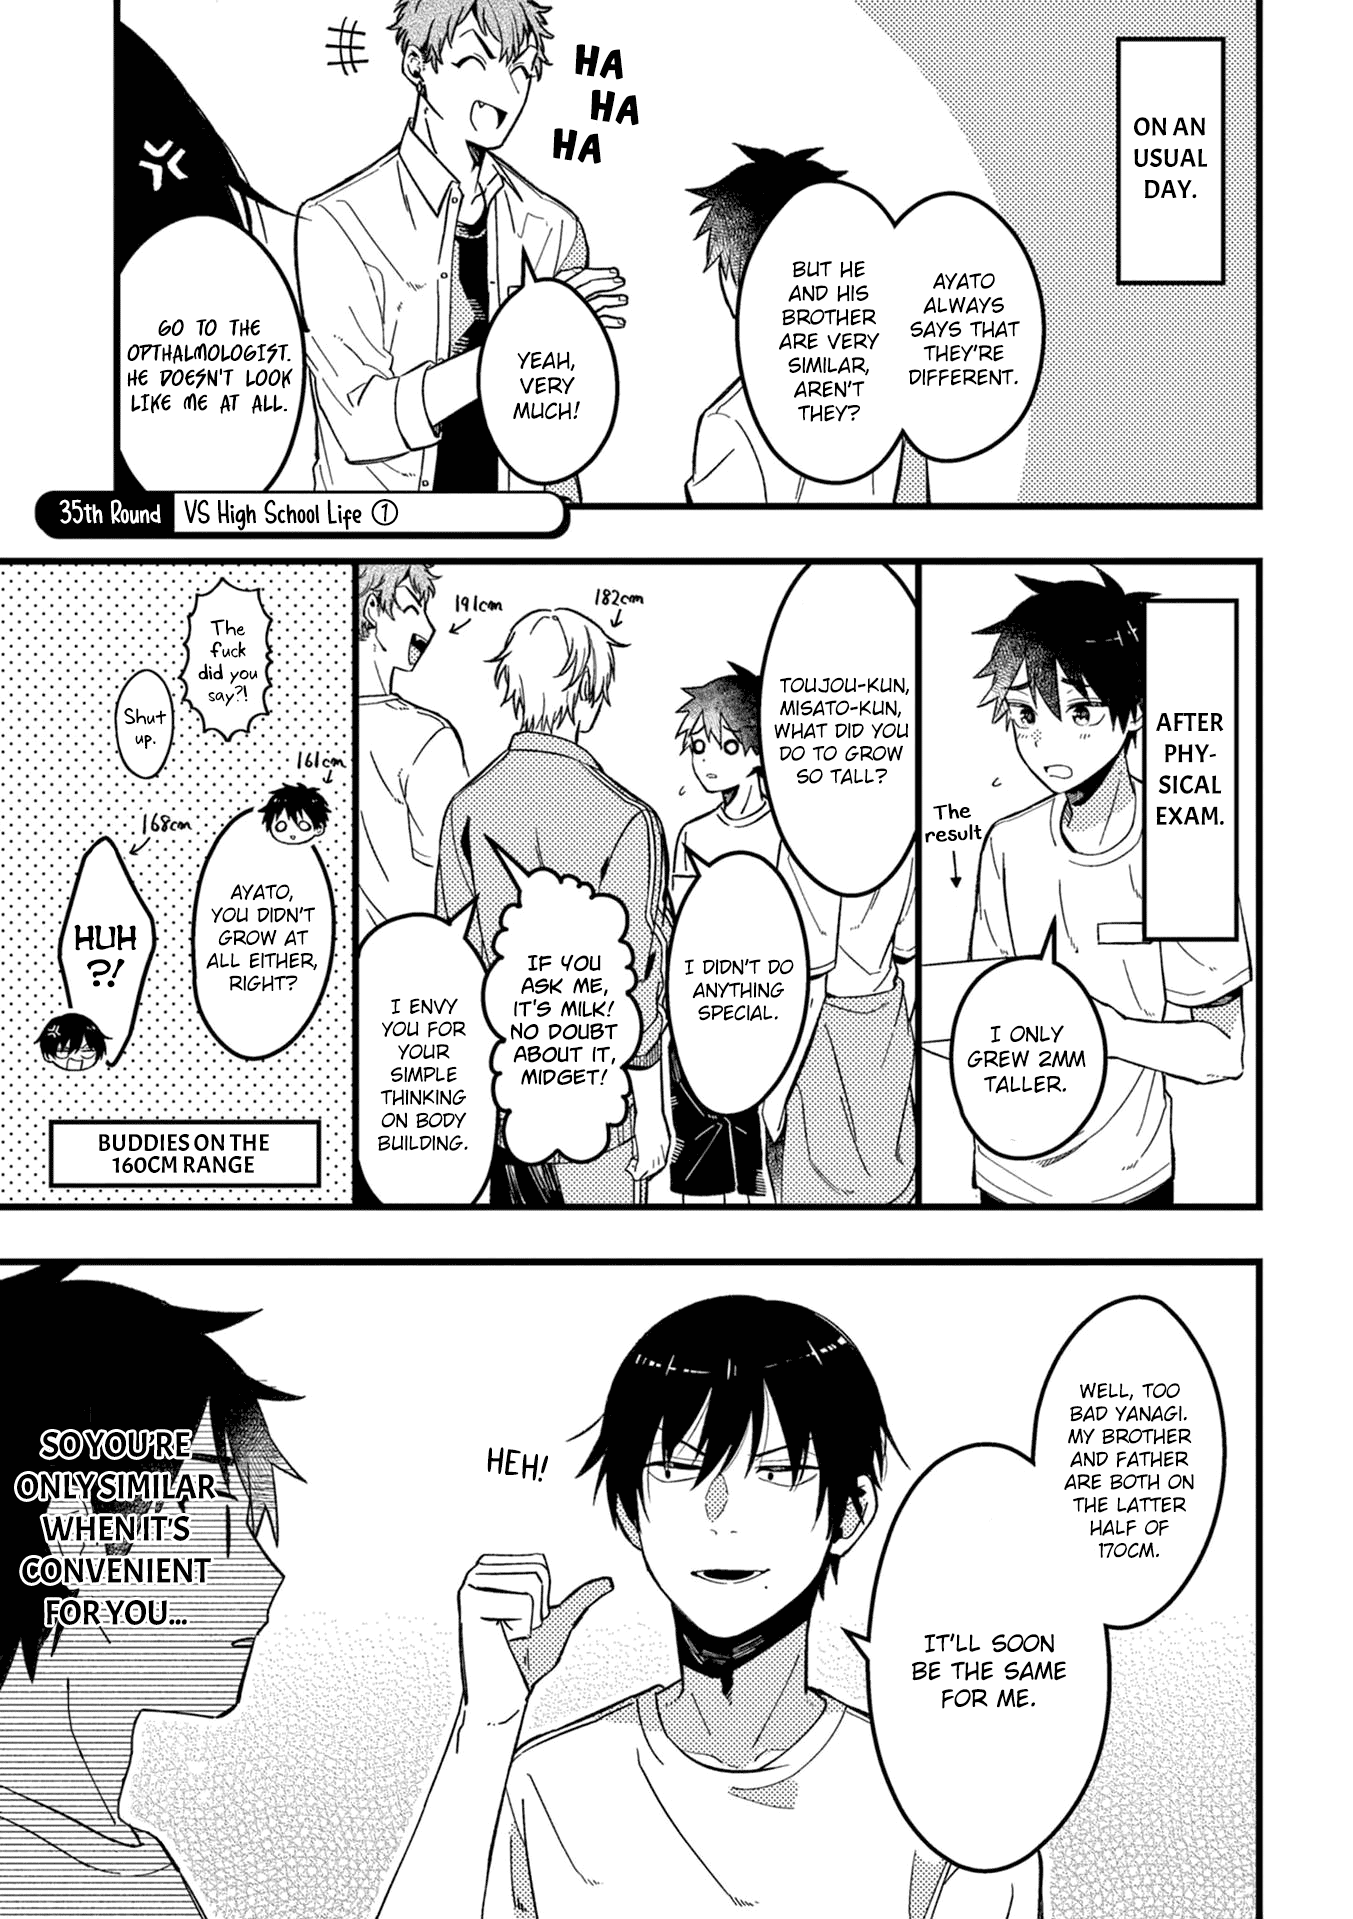 A World Where Everything Definitely Becomes Bl Vs. The Man Who Definitely Doesn't Want To Be In A Bl Vol.2 Chapter 35: Vs High School Life - Picture 2